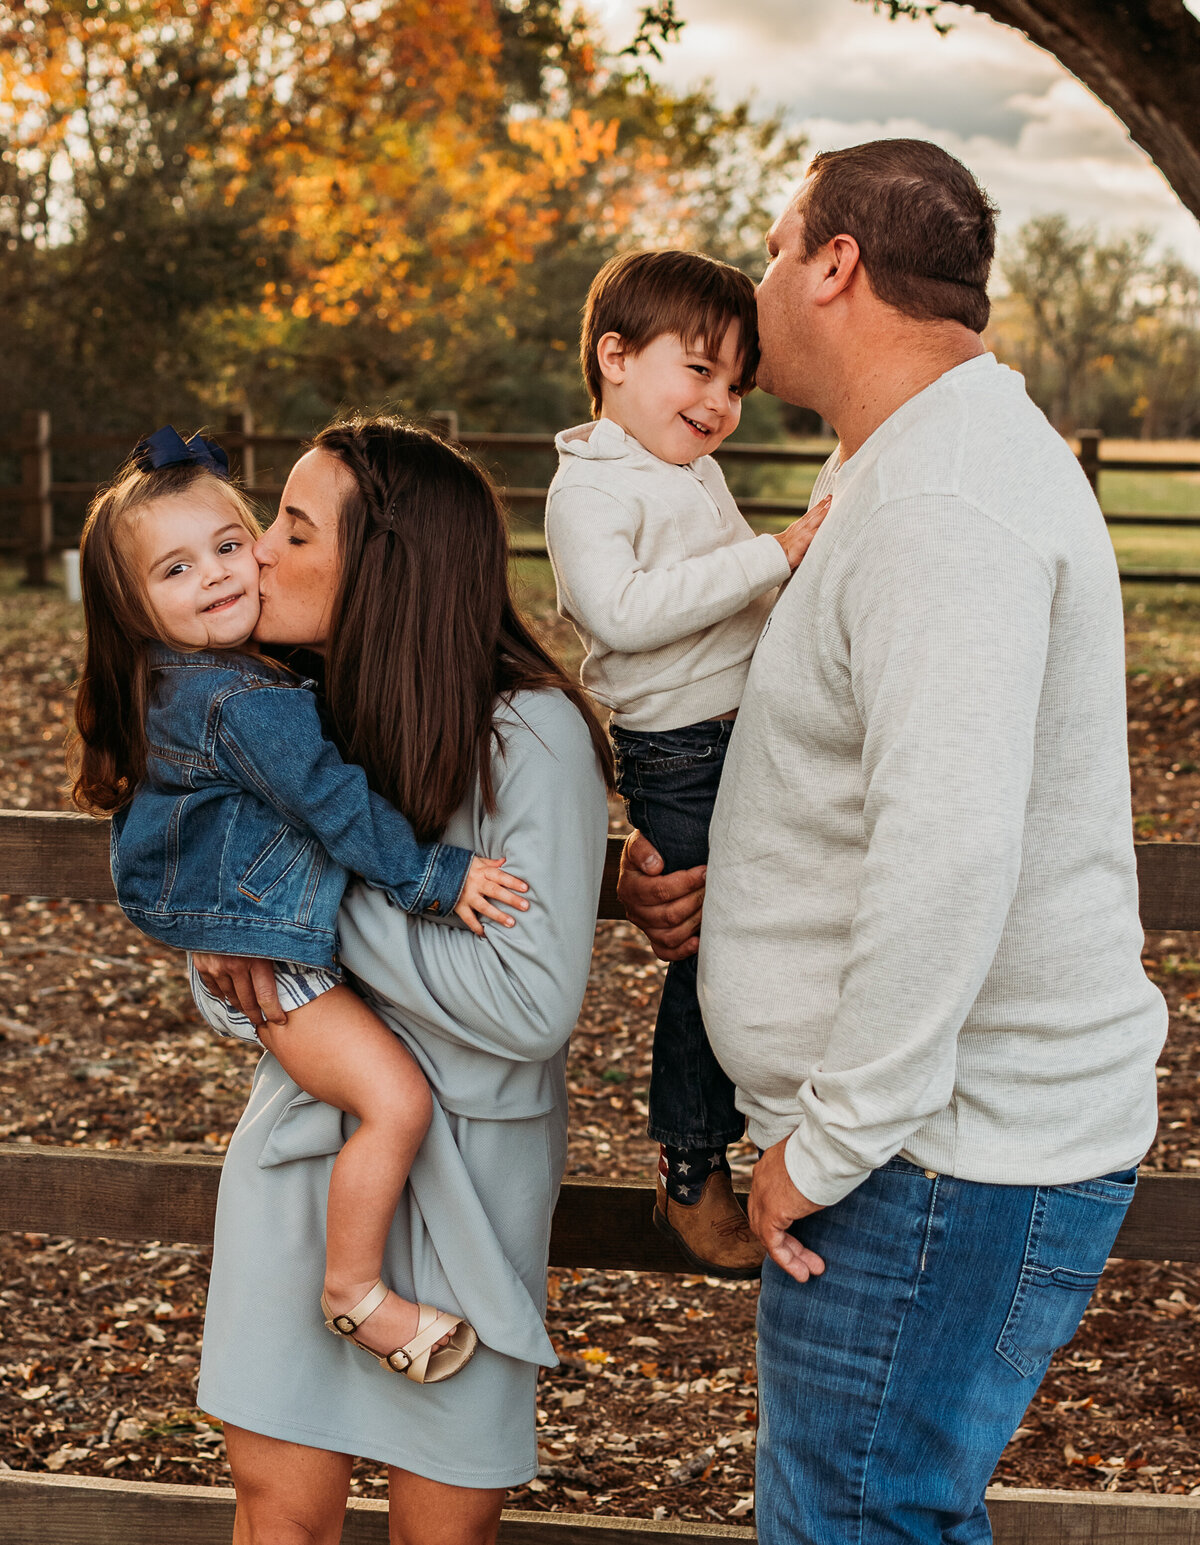 A mom and dad kiss their young children with fall foliage in the background.